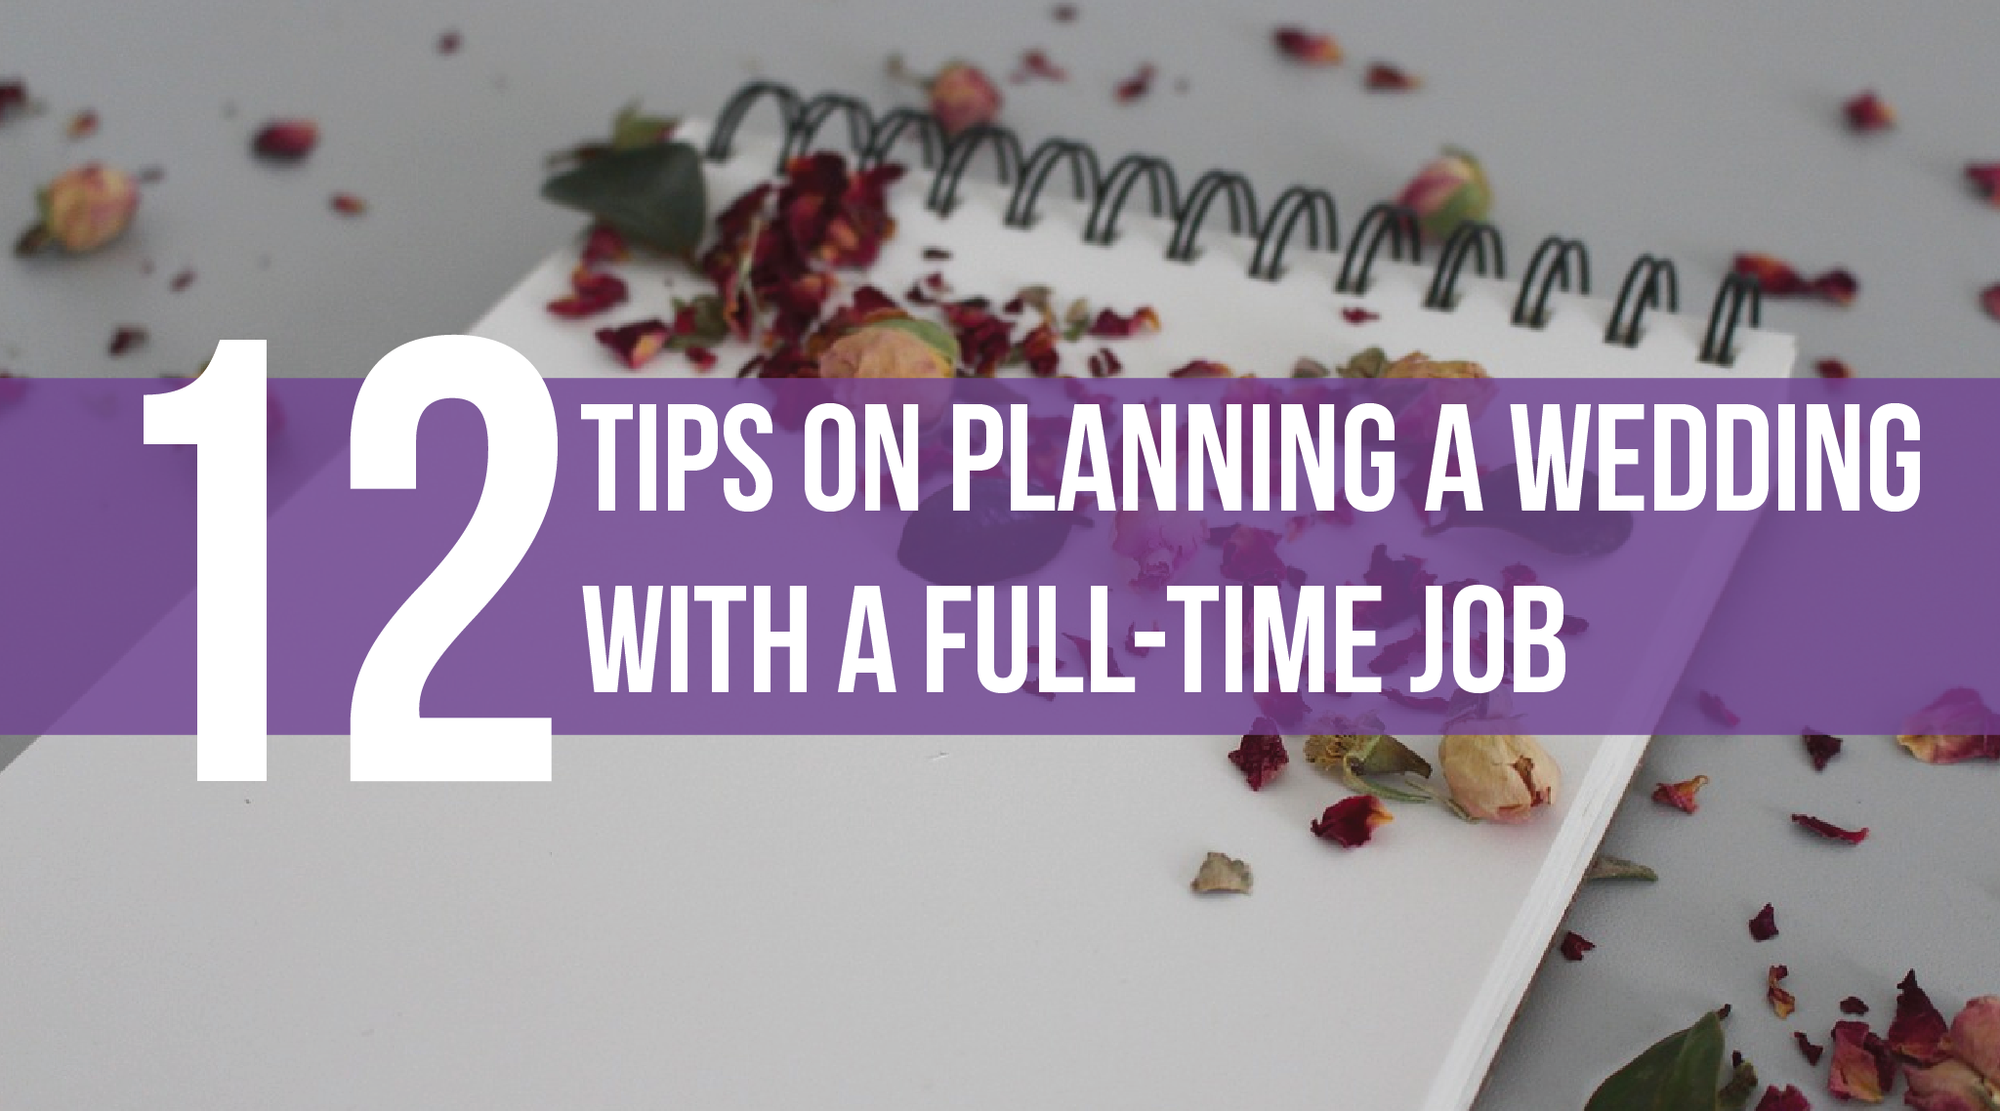 12 Tips on Planning a Wedding with a Full-time Job